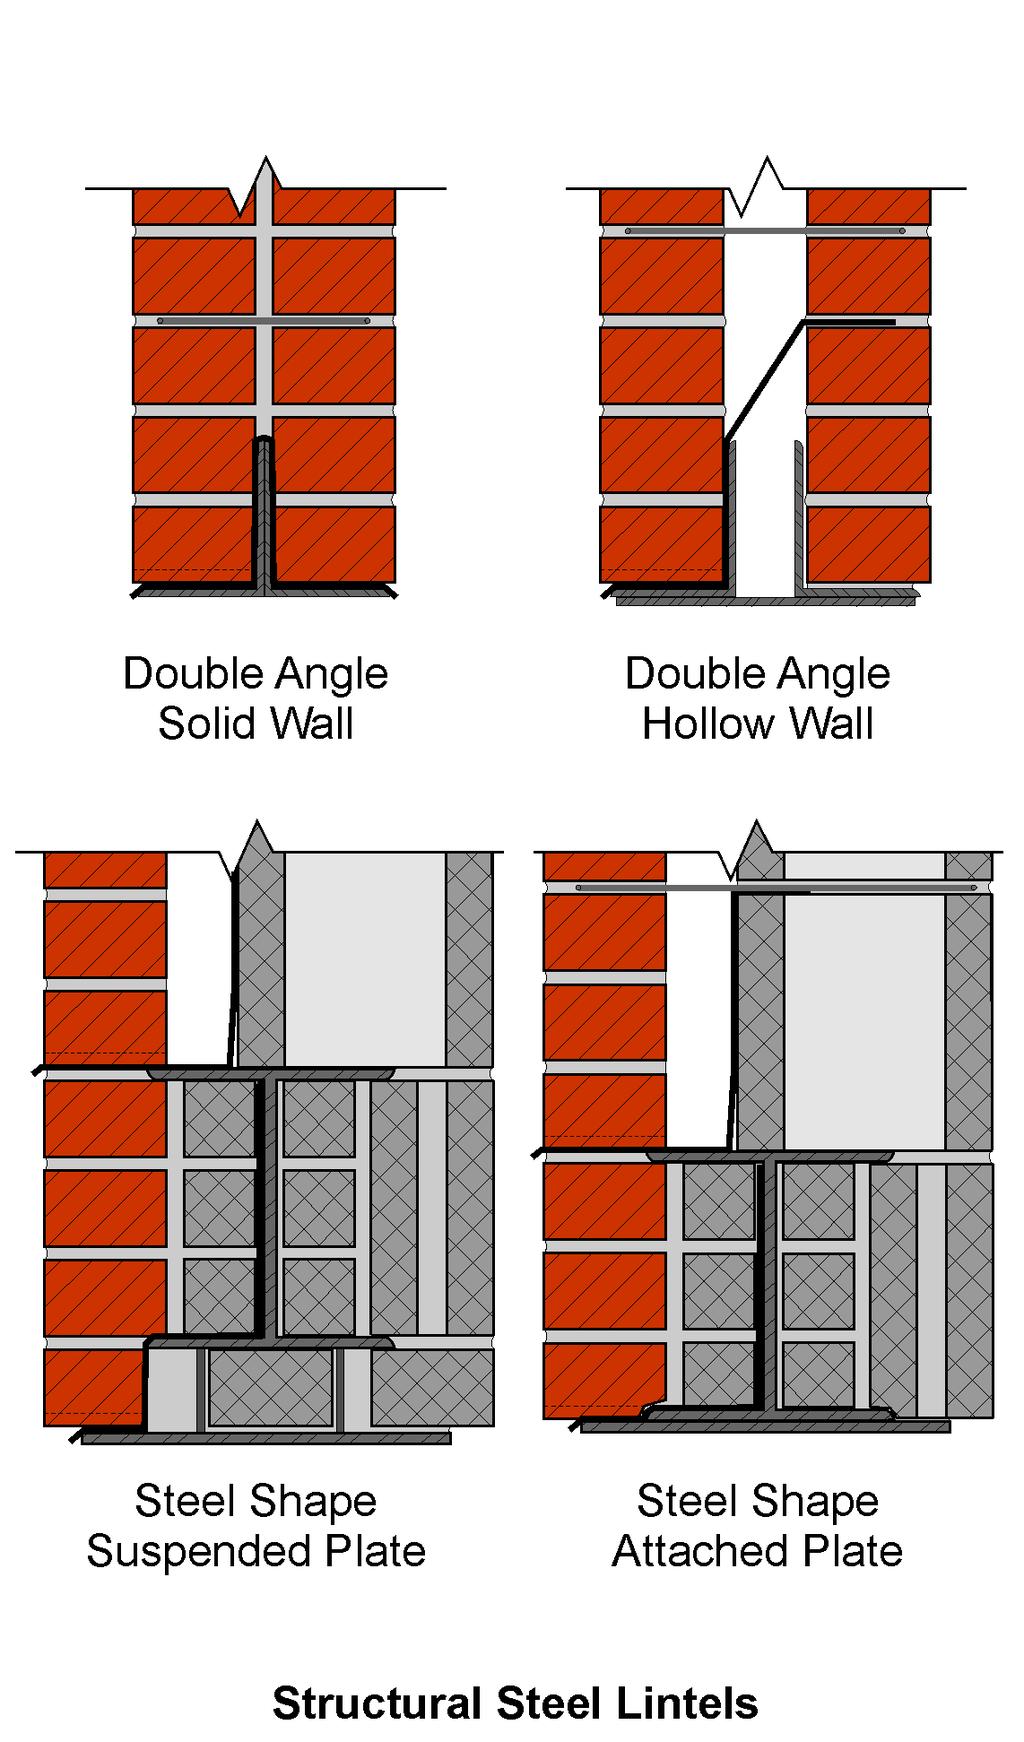 Figure 17 Shelf Angle with Concrete Frame Figure 16 Structural Steel Lintels it is recommended to apply a protective coating to the steel and install an additional line of flashing at the lowest